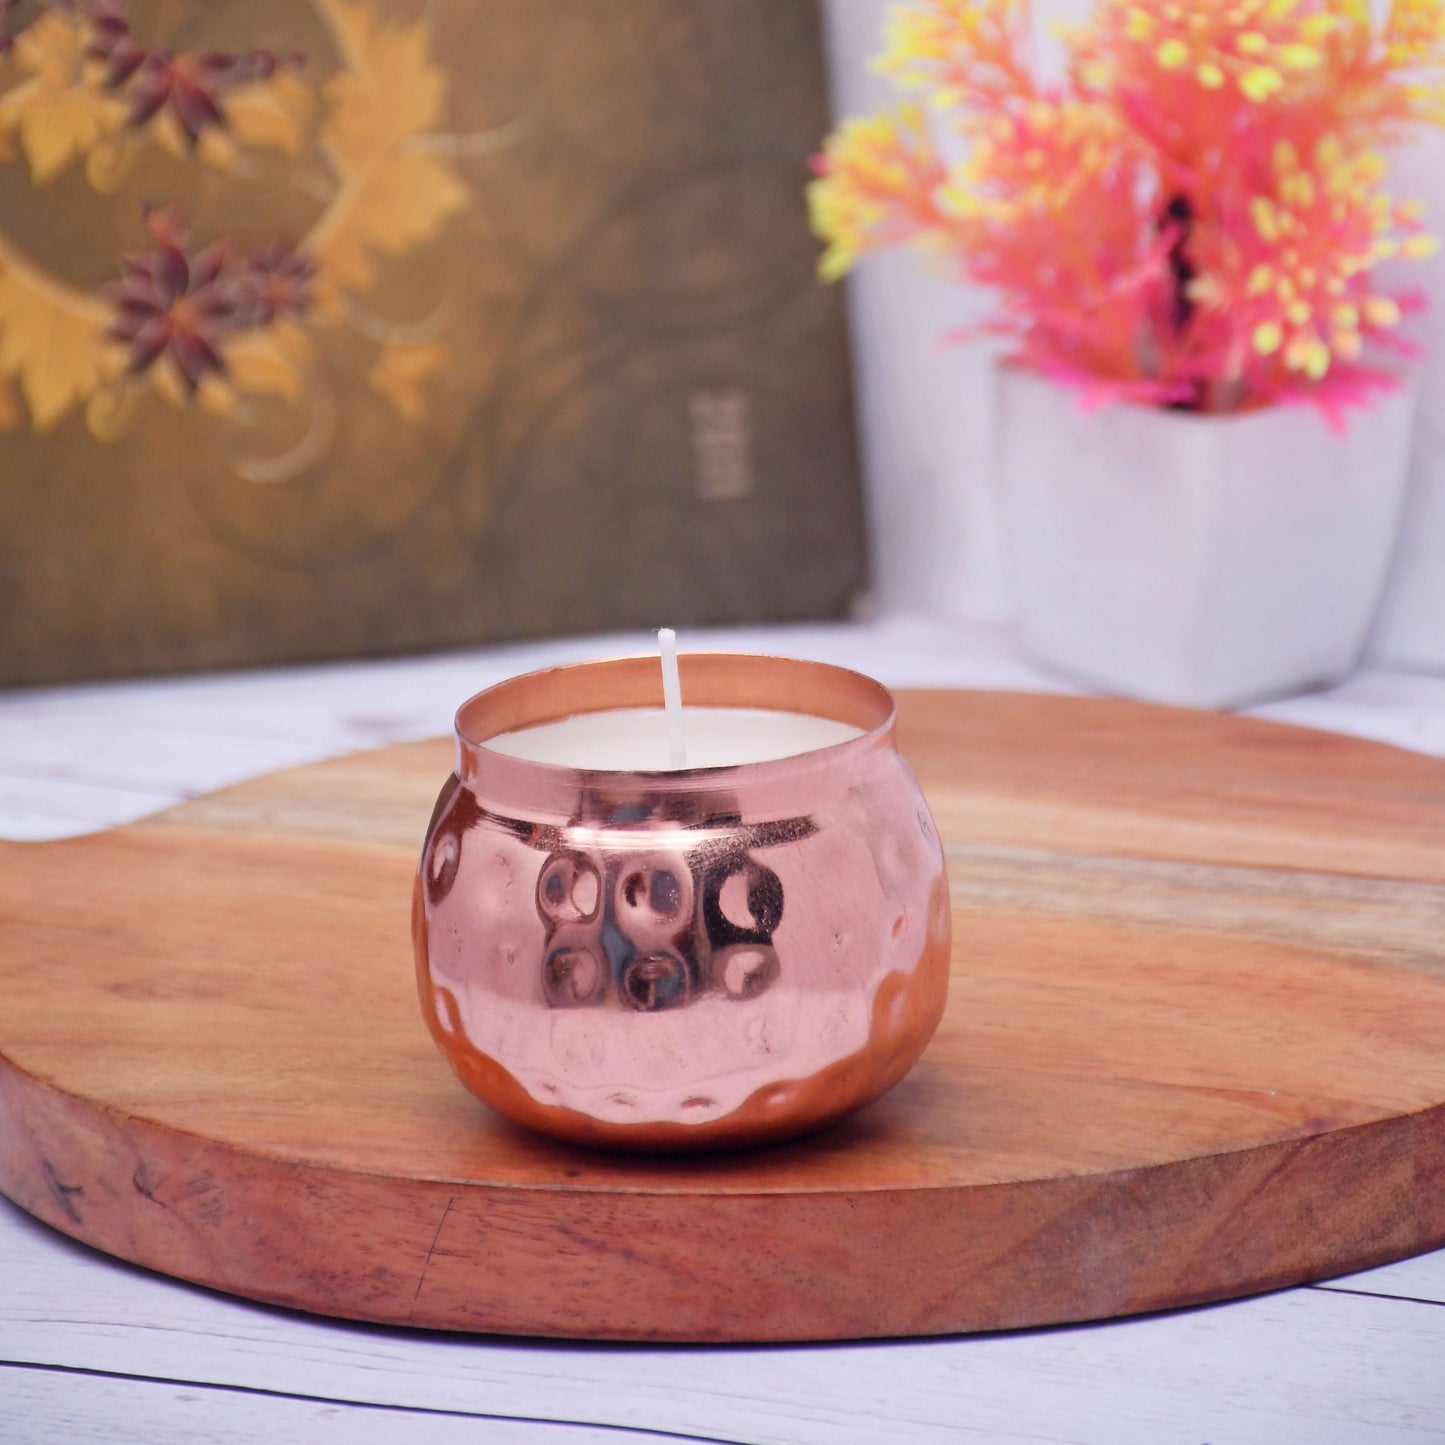 SAMA Homes - copper finish hammered votive metal pot with soy wax candle french vanilla aroma small